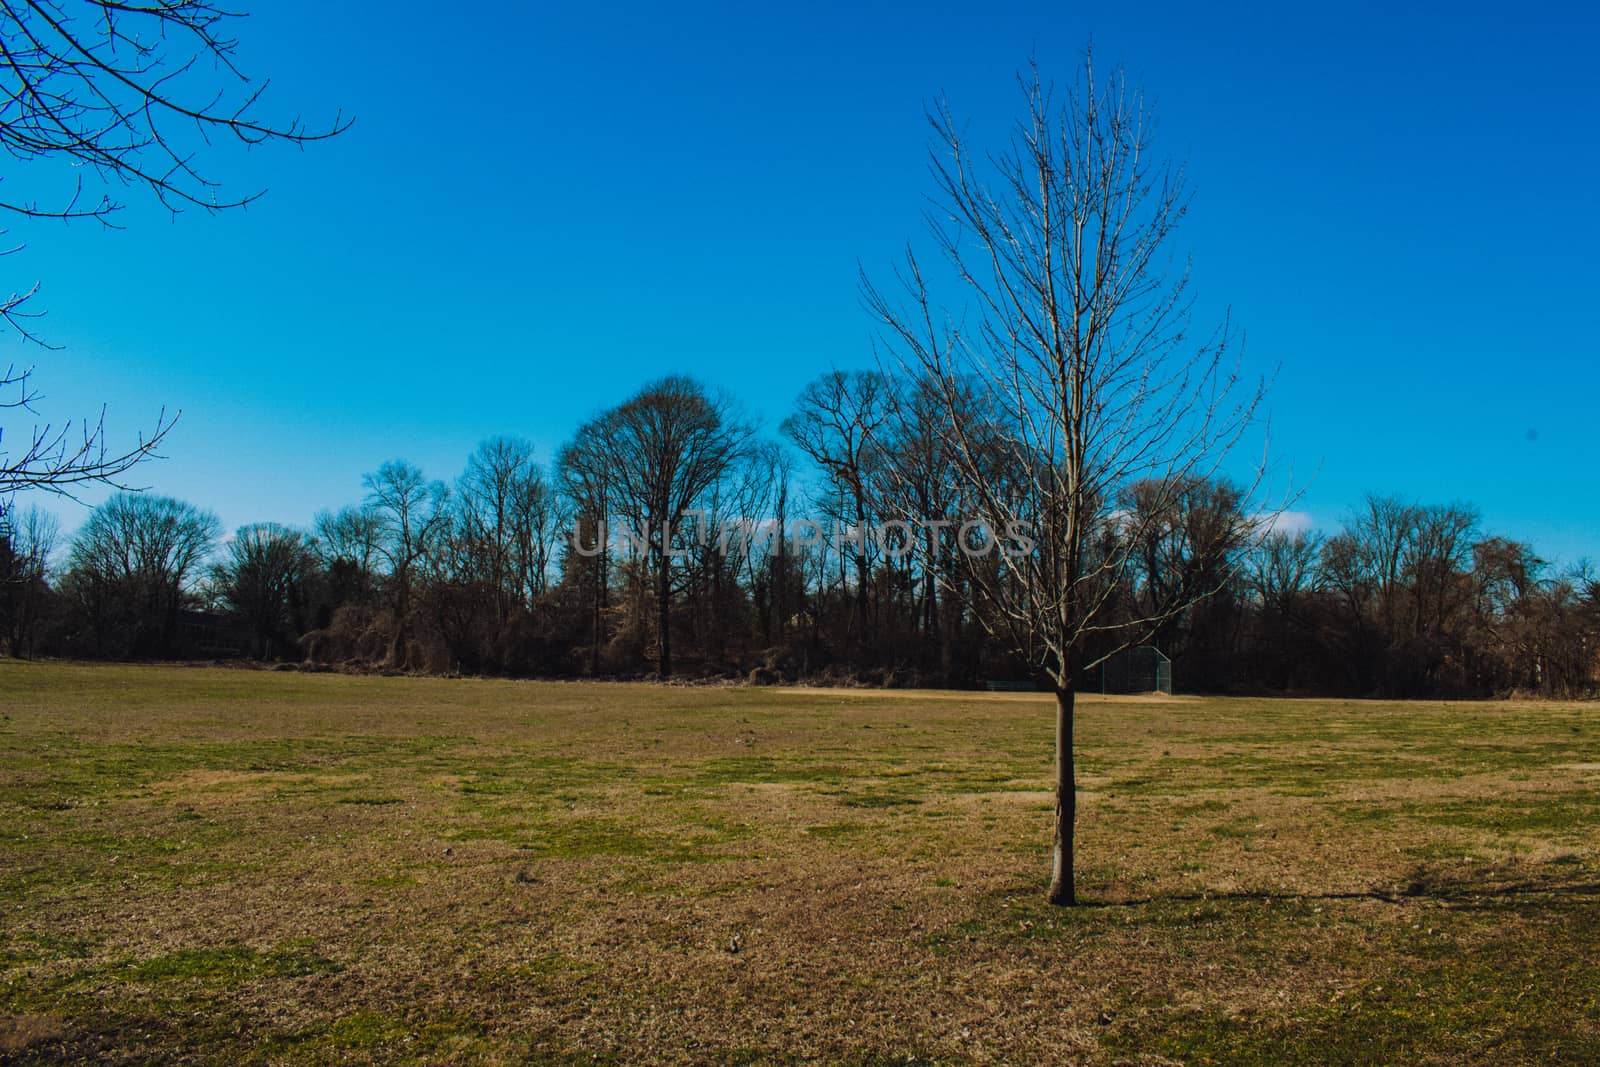 A Lone Tree in a Large Grass Field With a Group of Trees Behind It